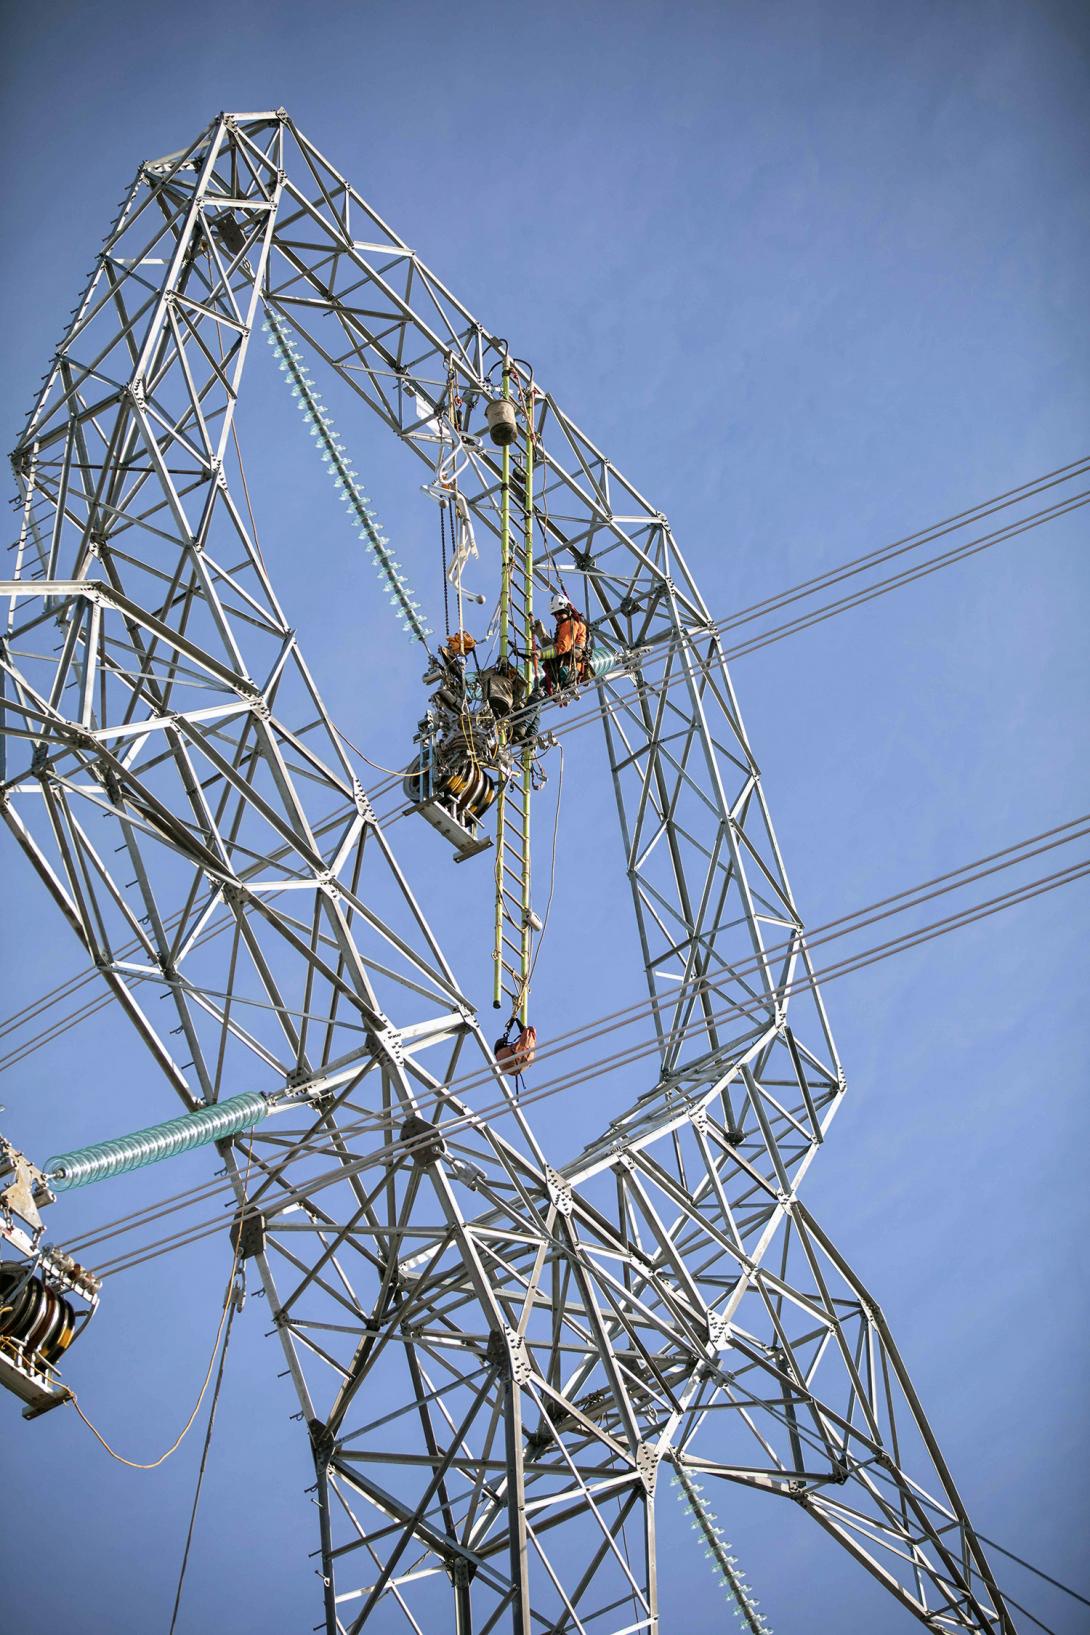 Attaching the centre-phase conductor and installing corona rings on a transmission tower. | February 2022